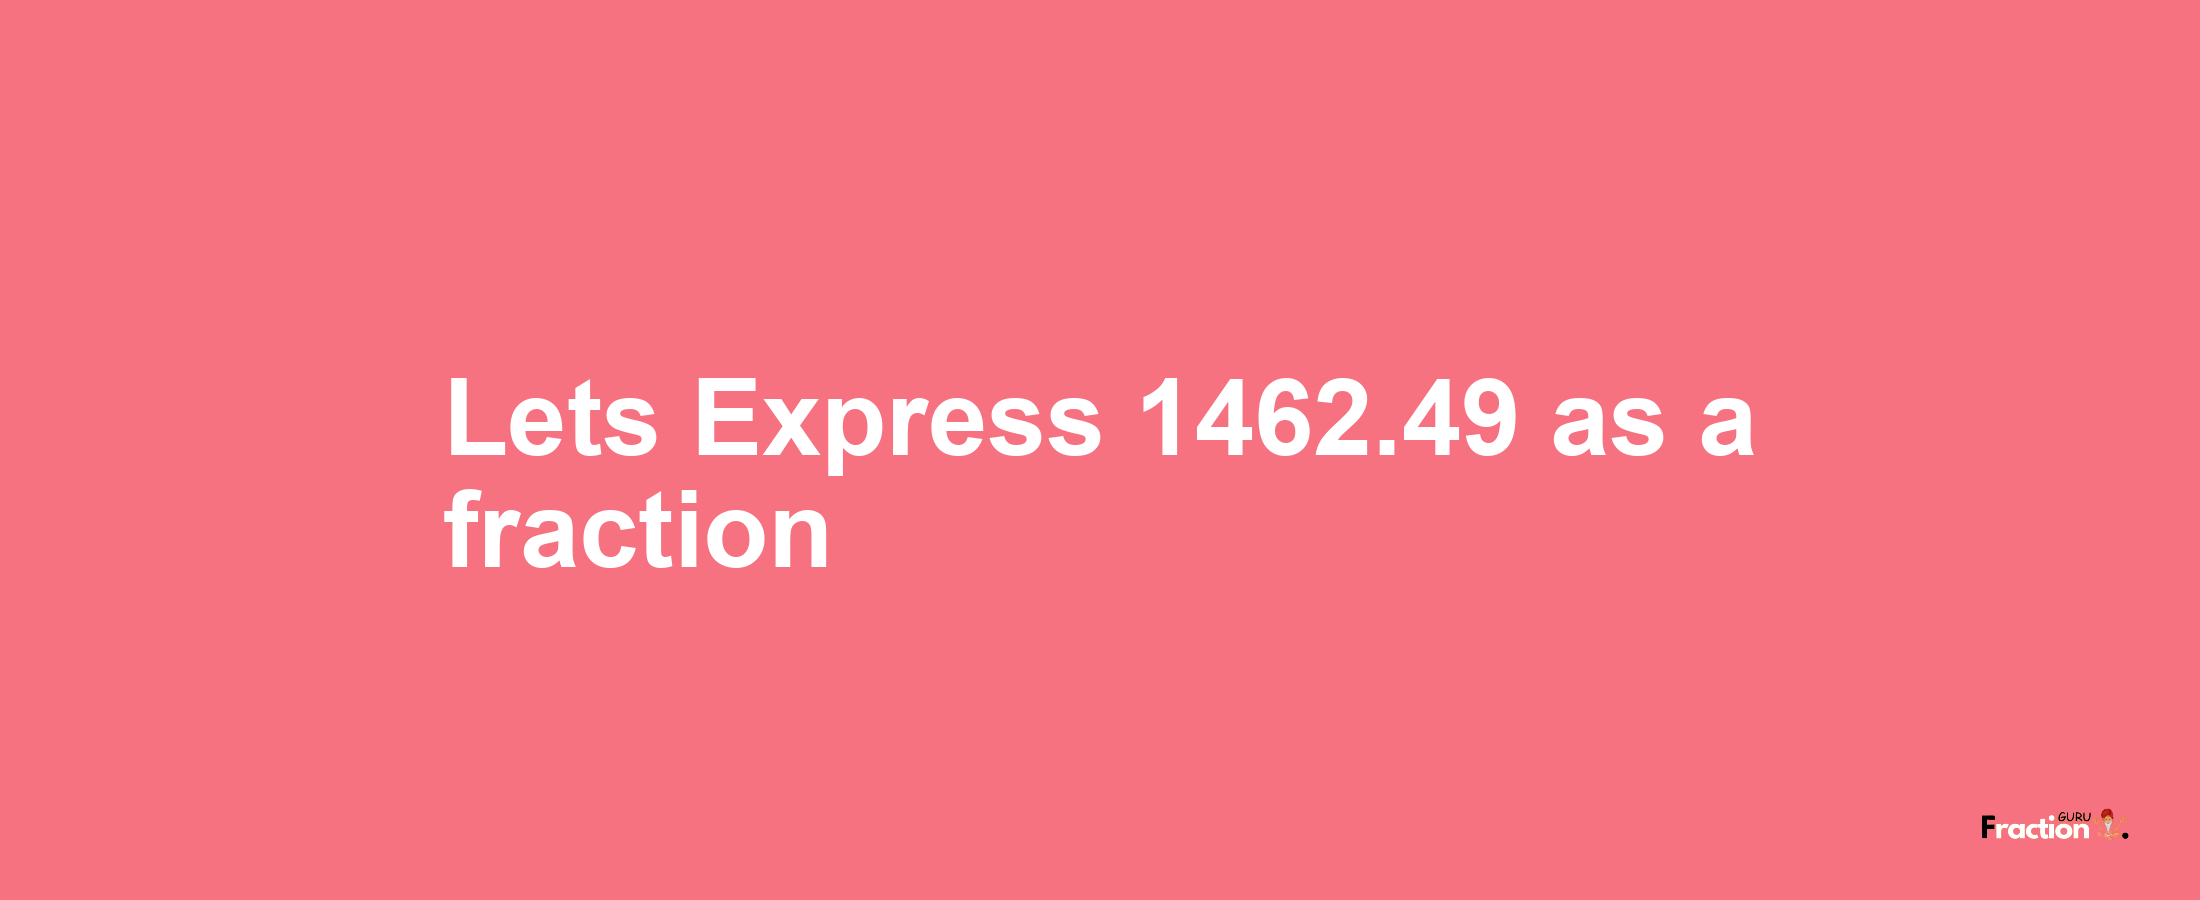 Lets Express 1462.49 as afraction